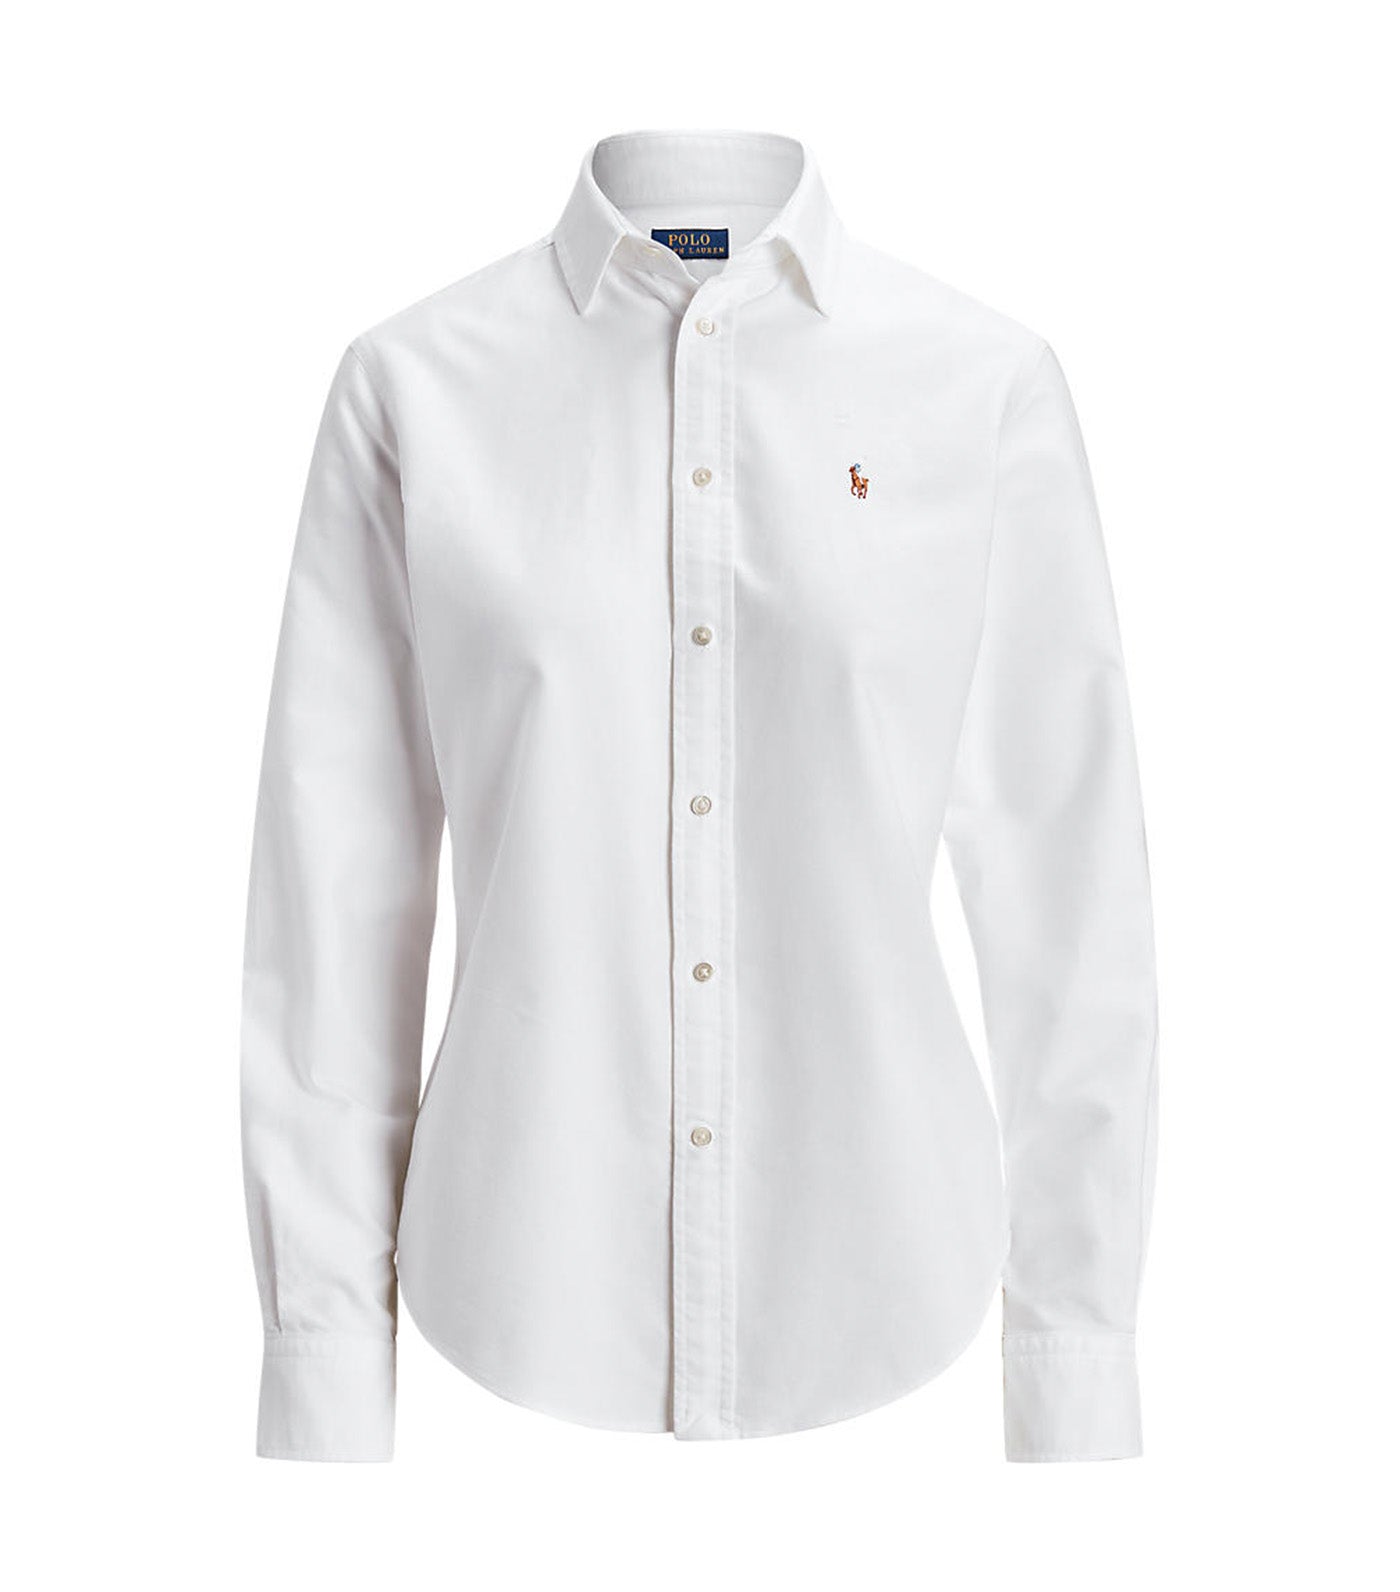 Women's Classic Fit Oxford Shirt White